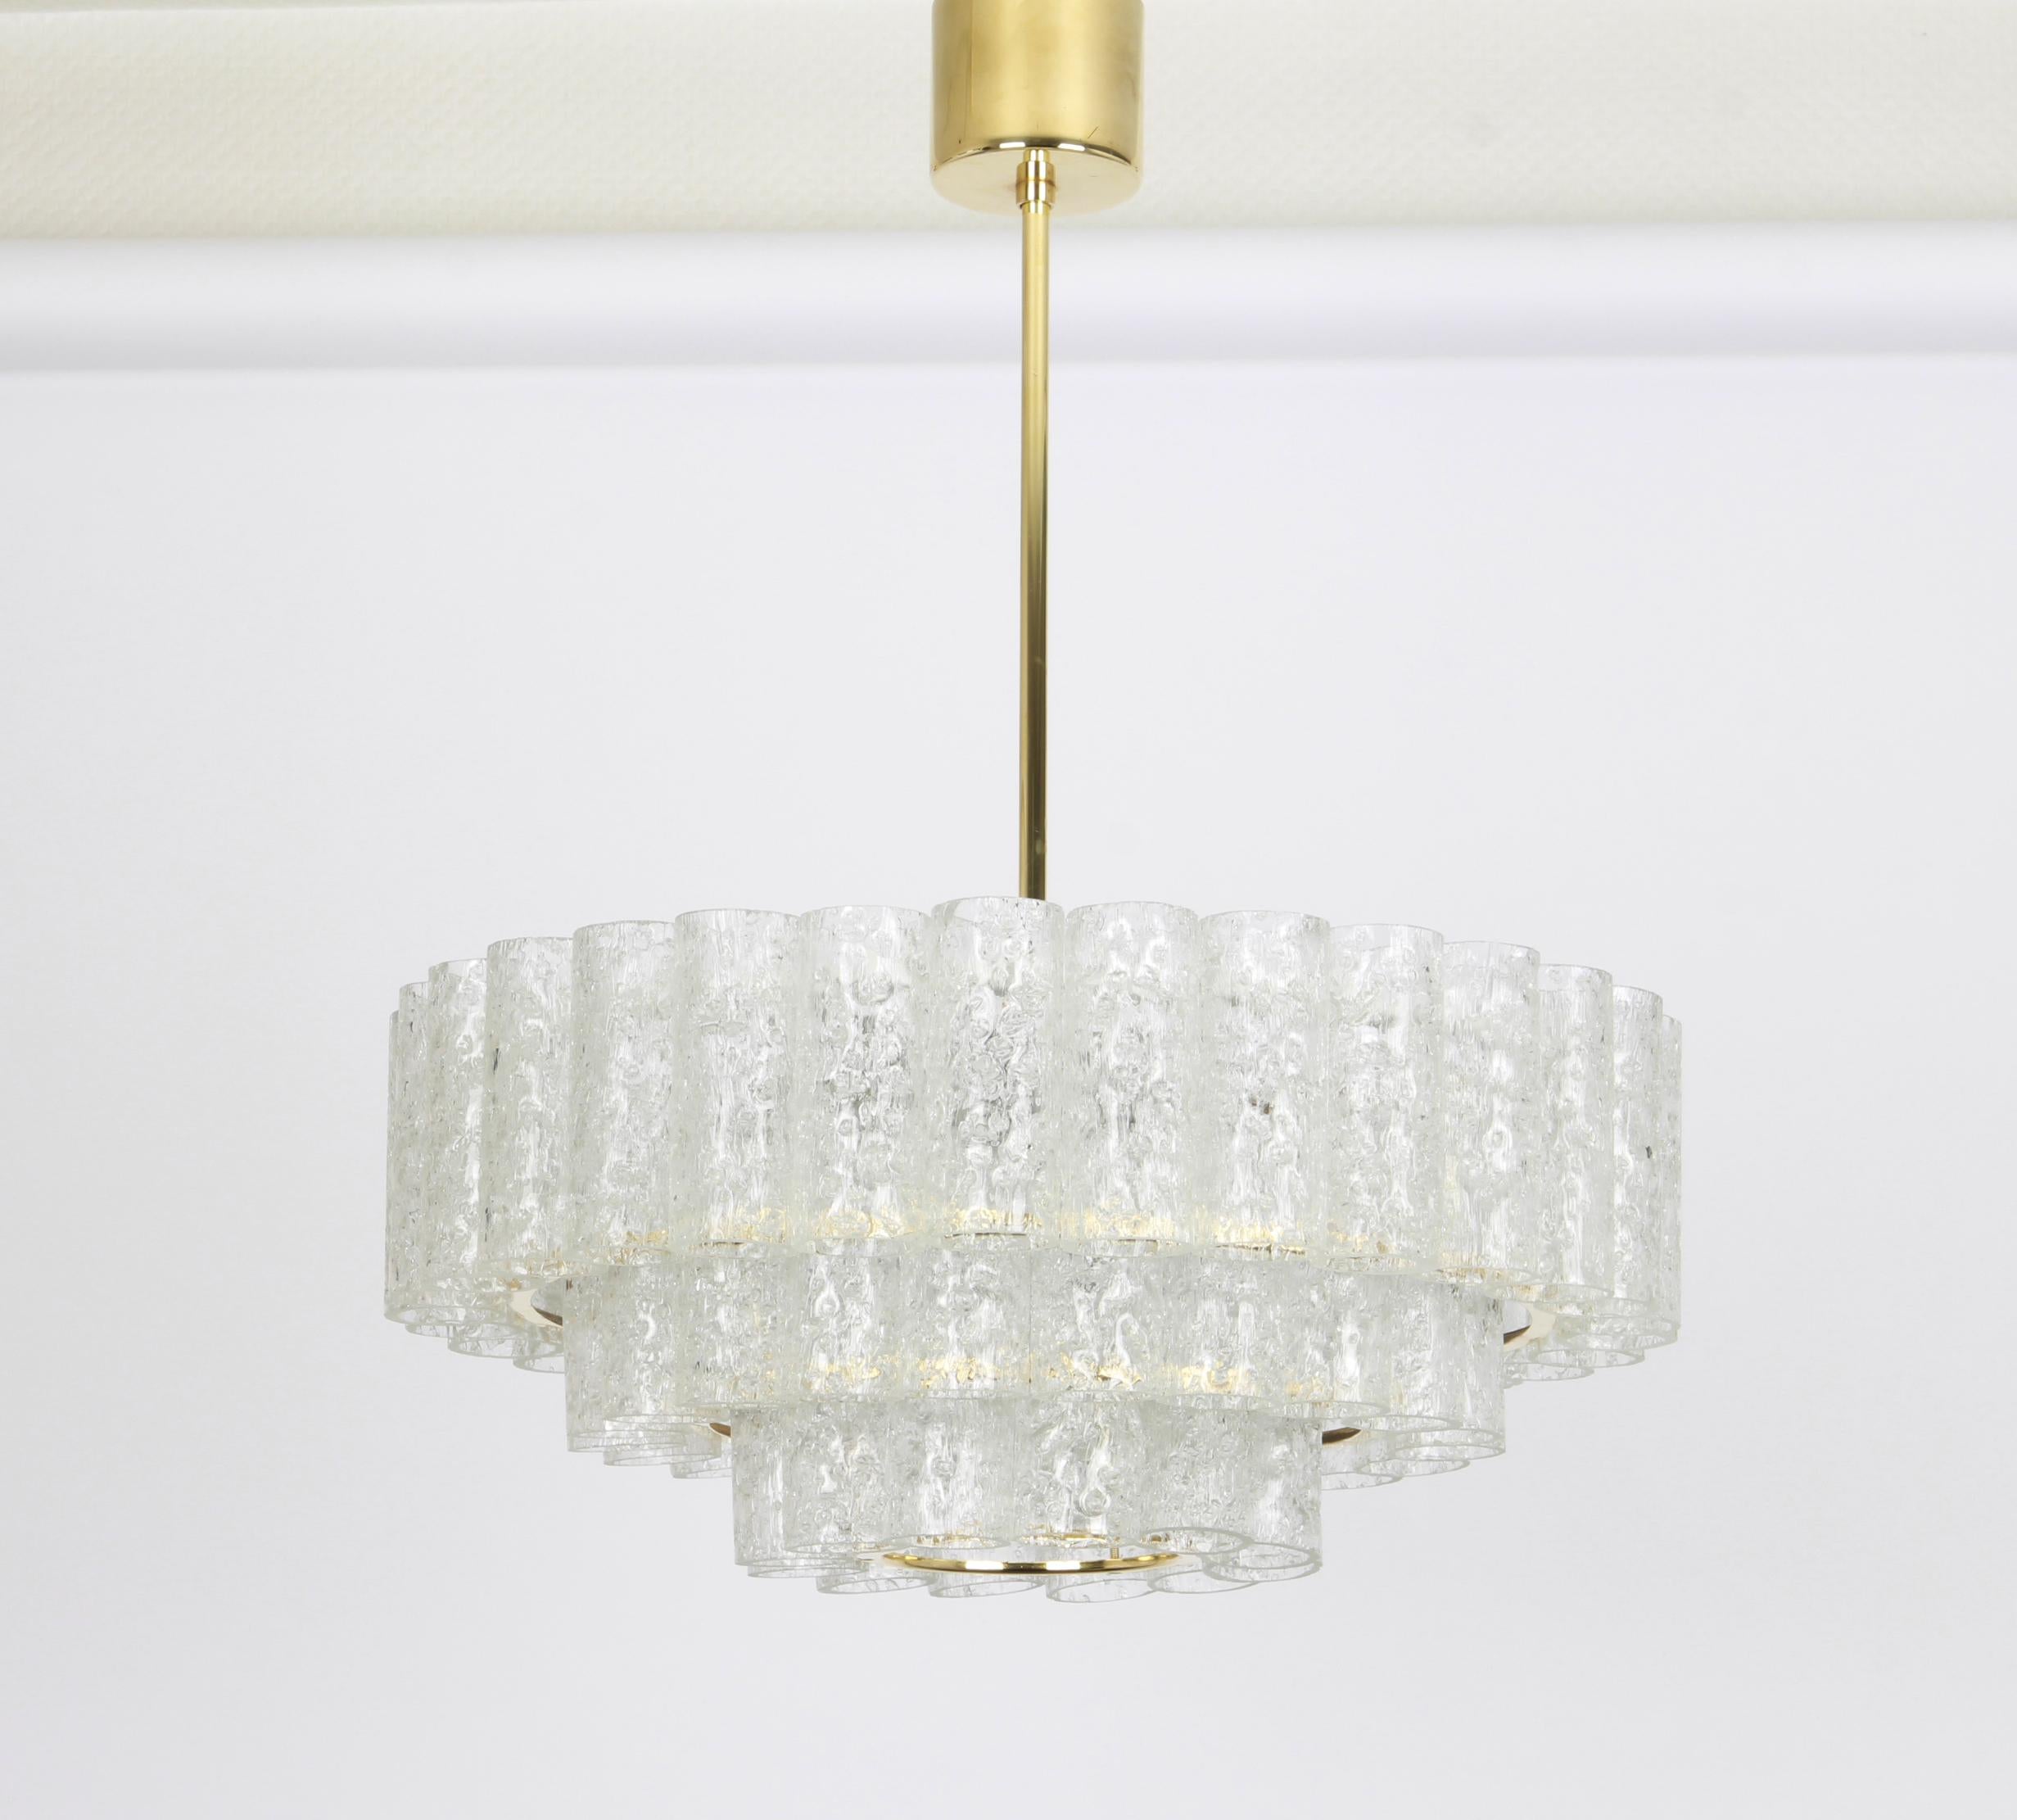 1 of 2 Stunning Murano Ice Glass Tubes Chandelier by Doria, Germany, 1960s For Sale 5